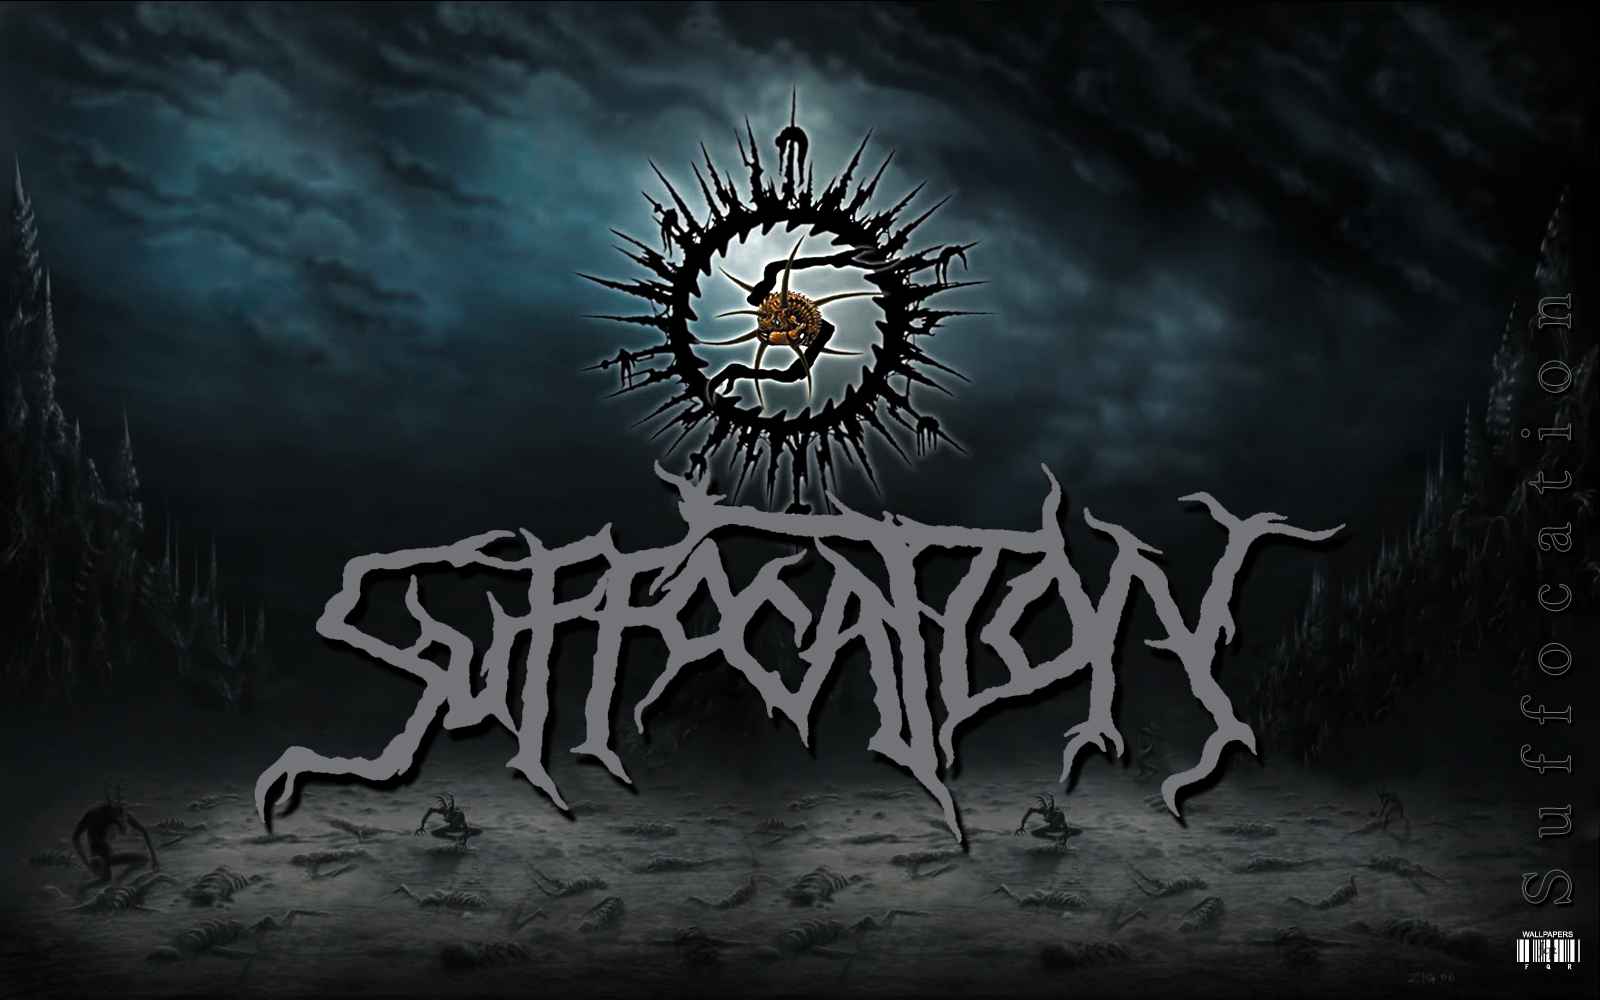 Are Ing Suffocation High Resolution HD Wallpaper Color